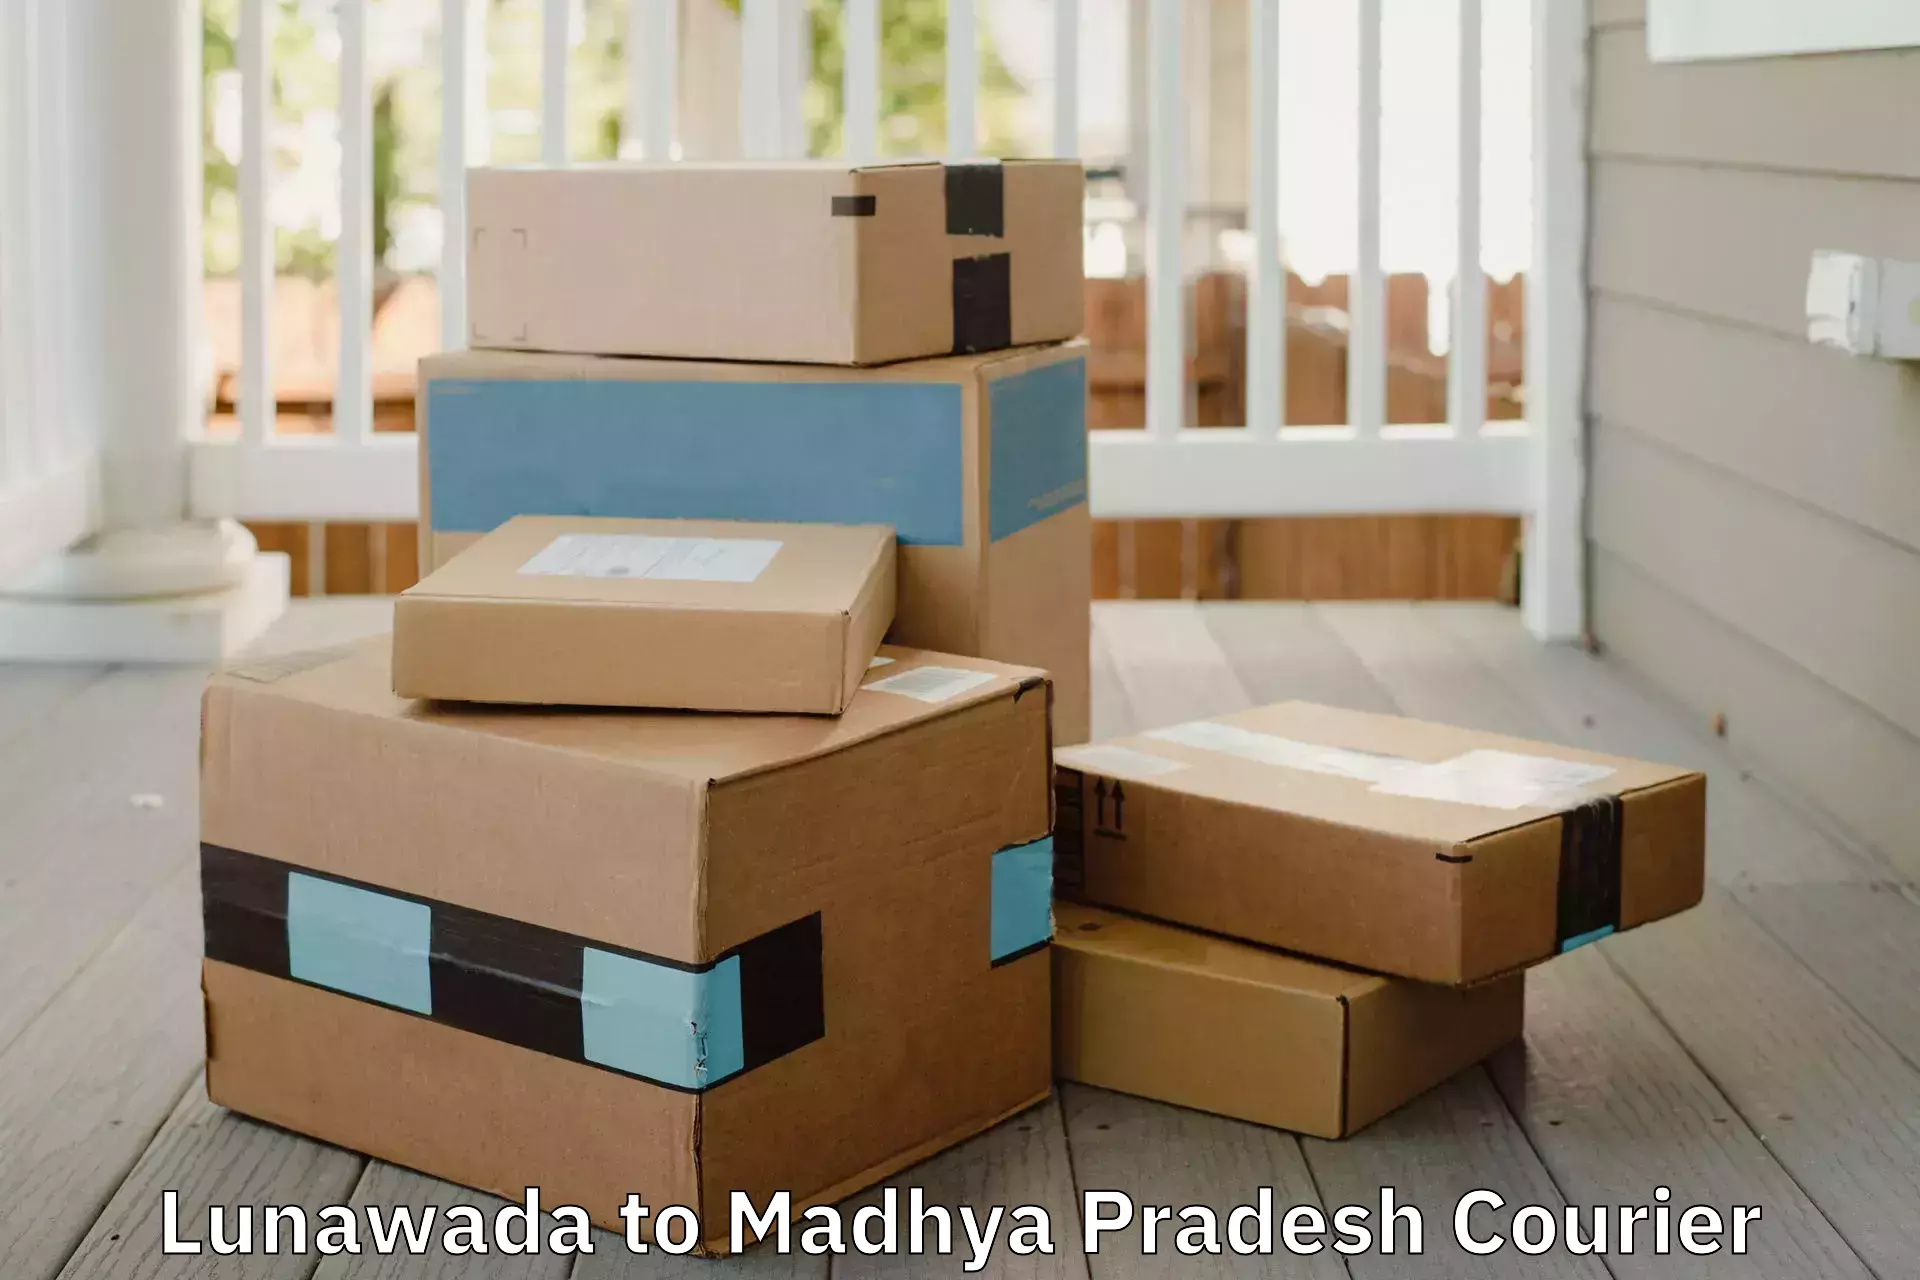 High-quality moving services in Lunawada to Madhya Pradesh